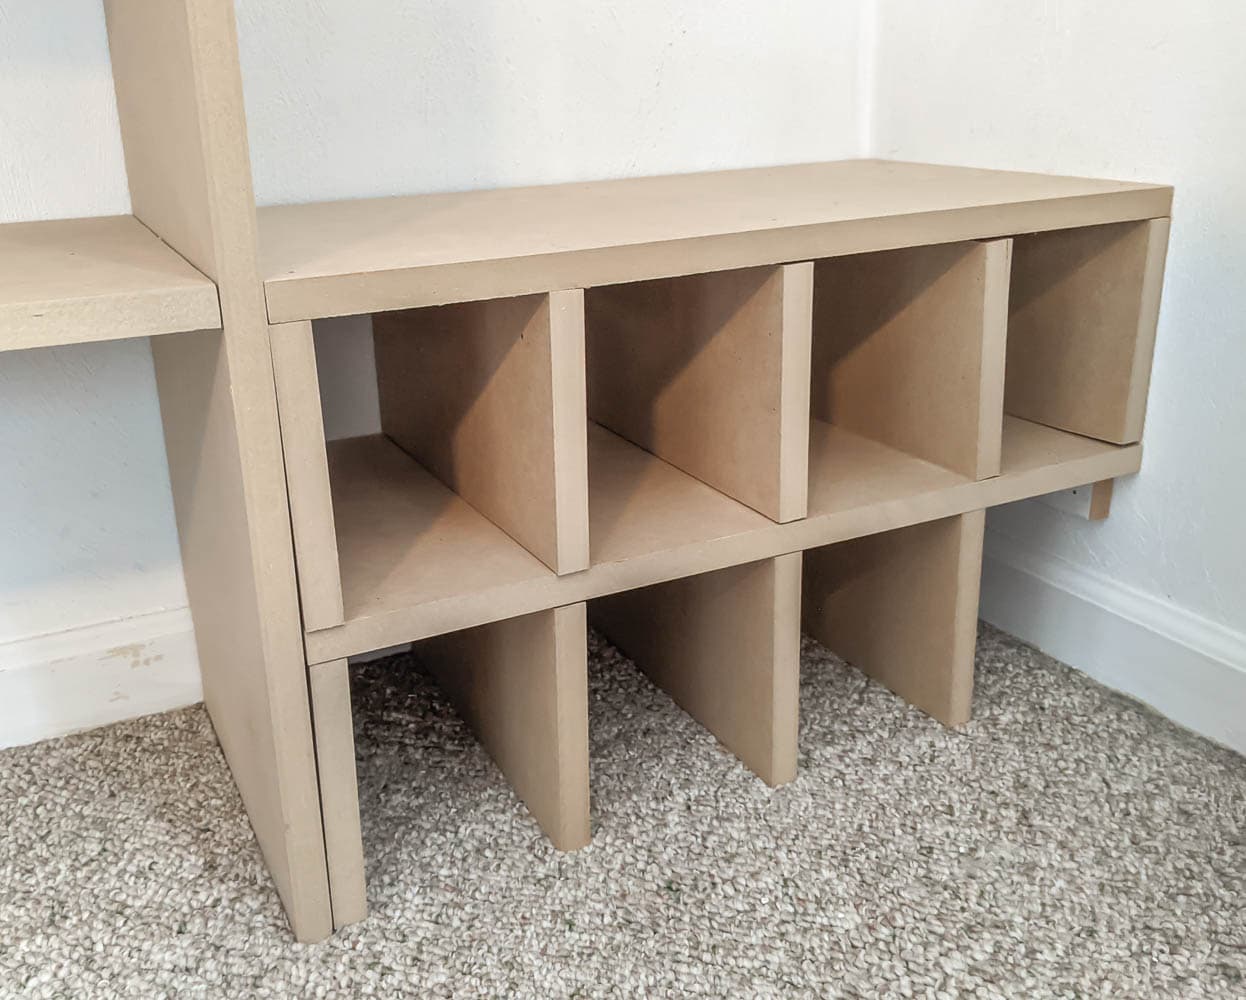 DIY shoe cubbies made from mdf.